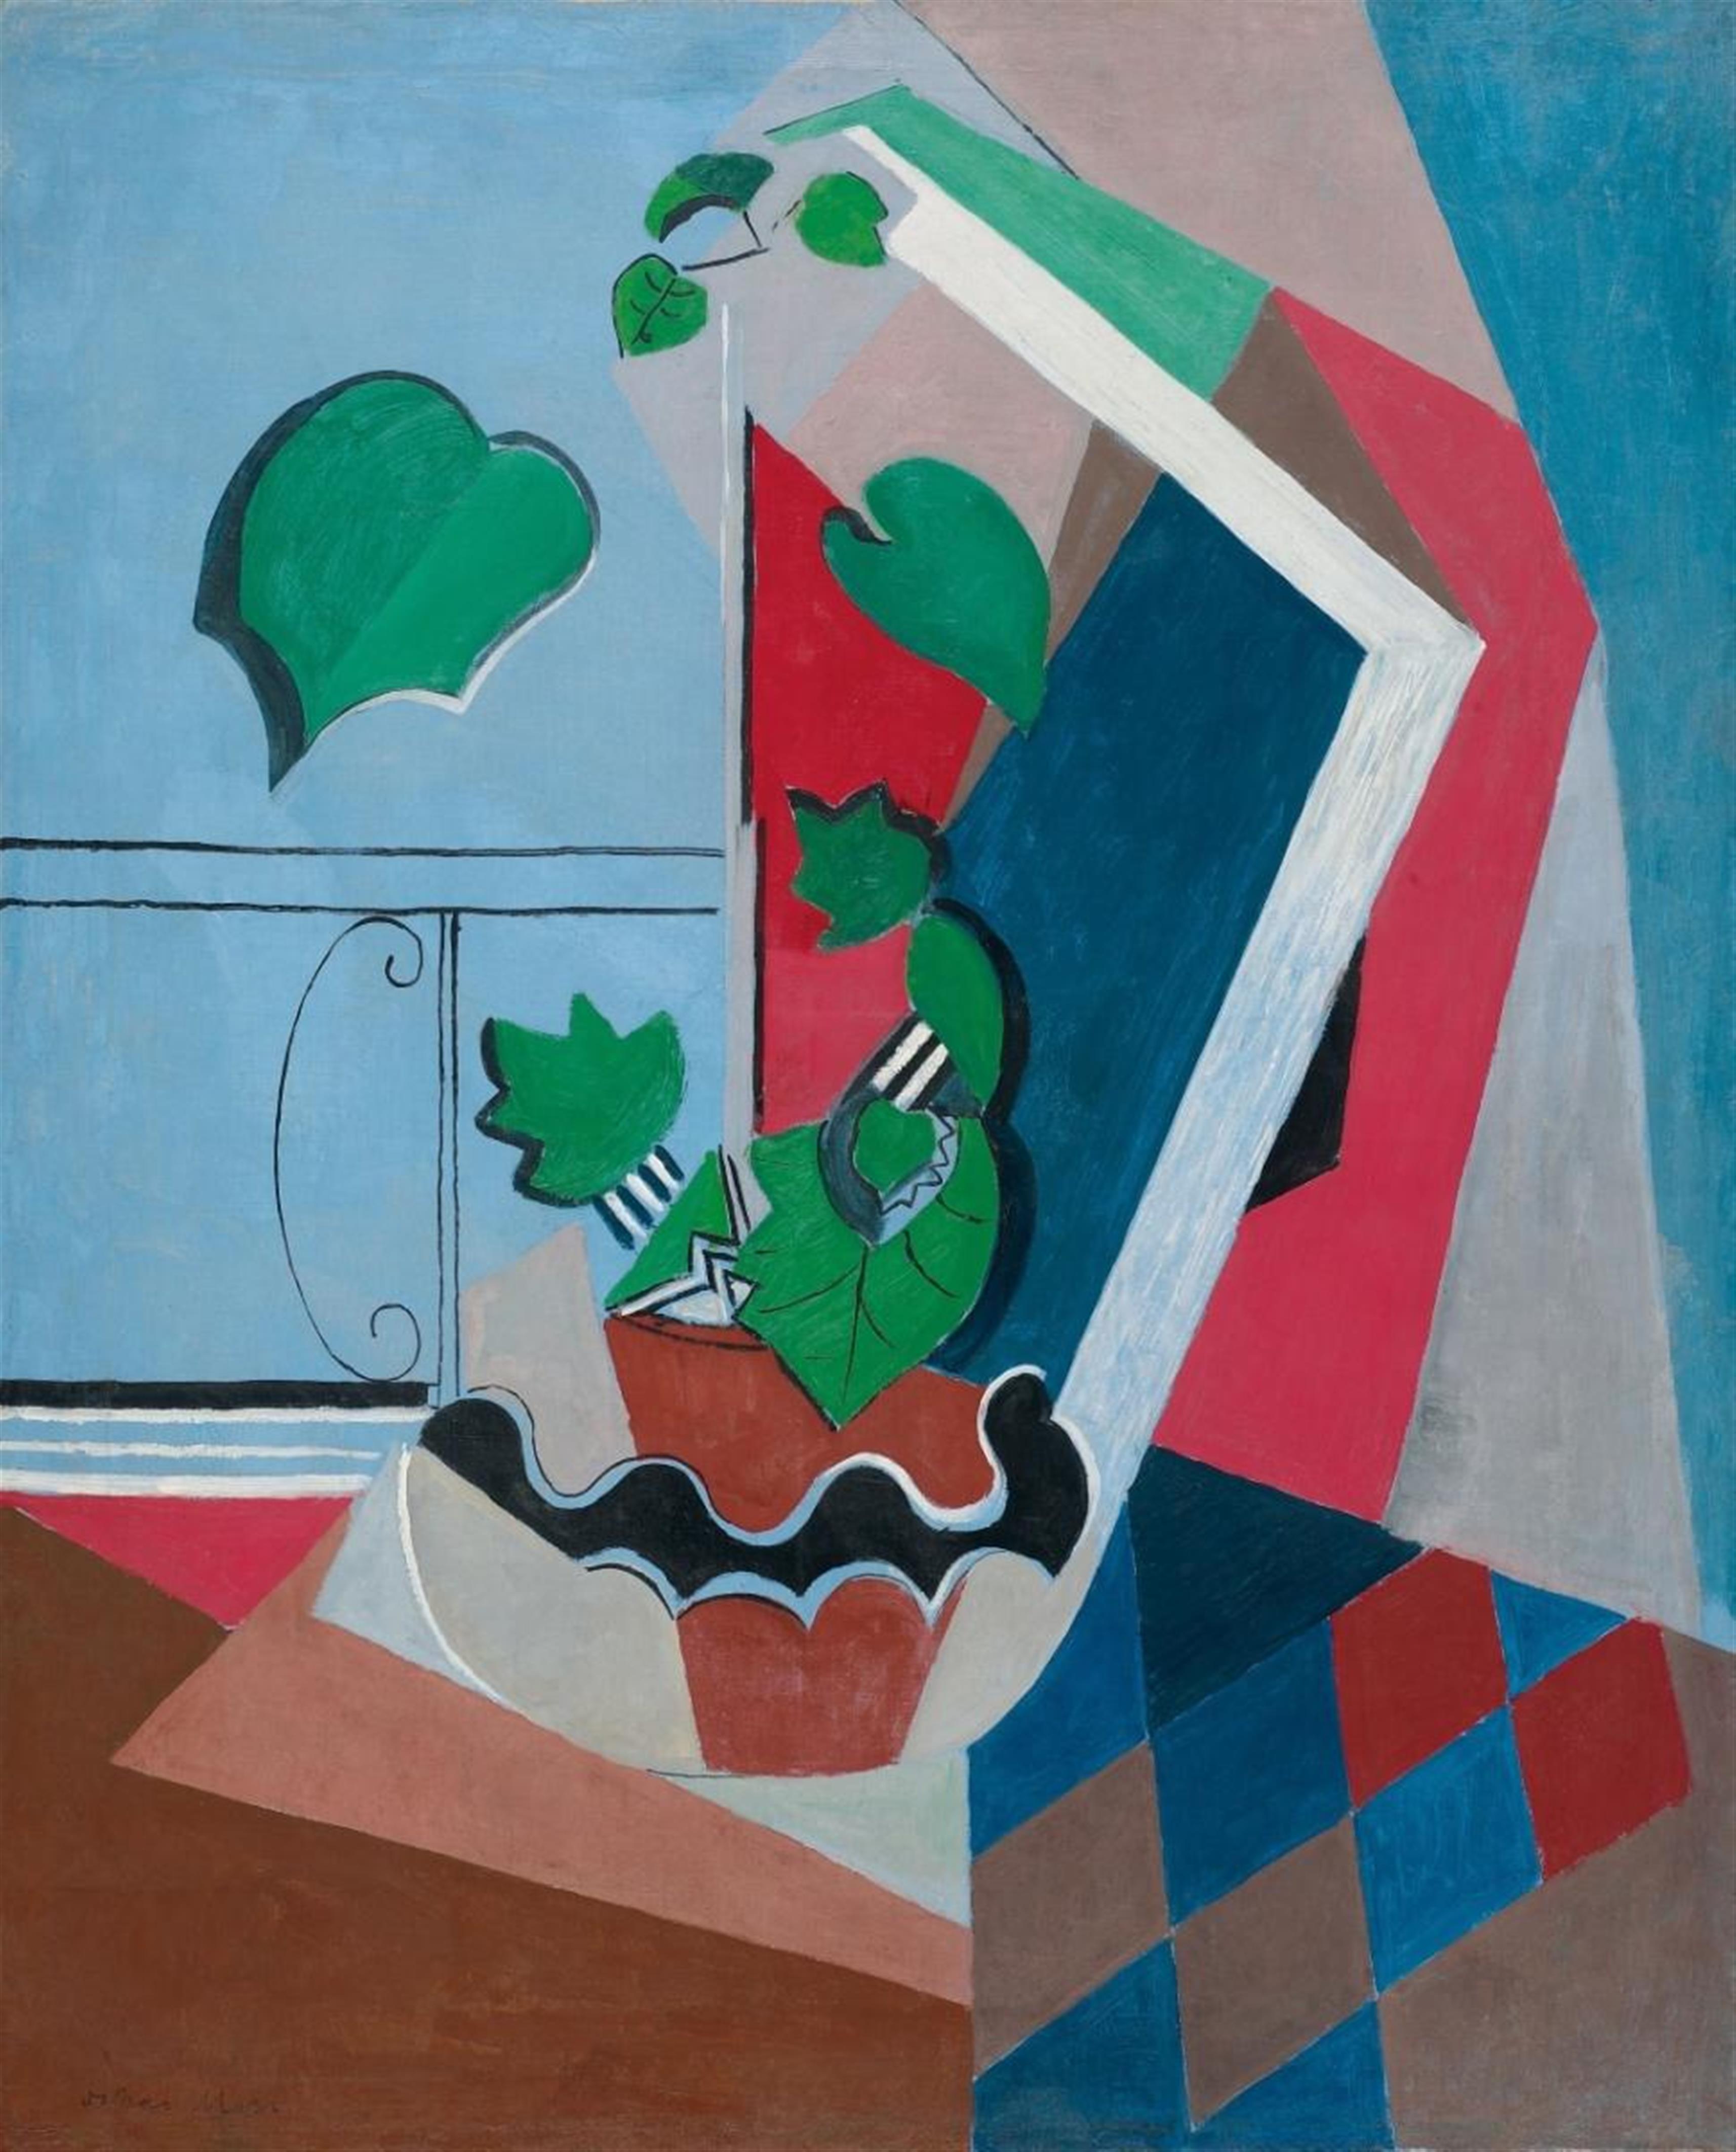 Oskar Moll - Komposition mit Zimmerlinde und Rautenmuster (Composition with Indoor Lime Tree and Diamond Pattern) - image-1